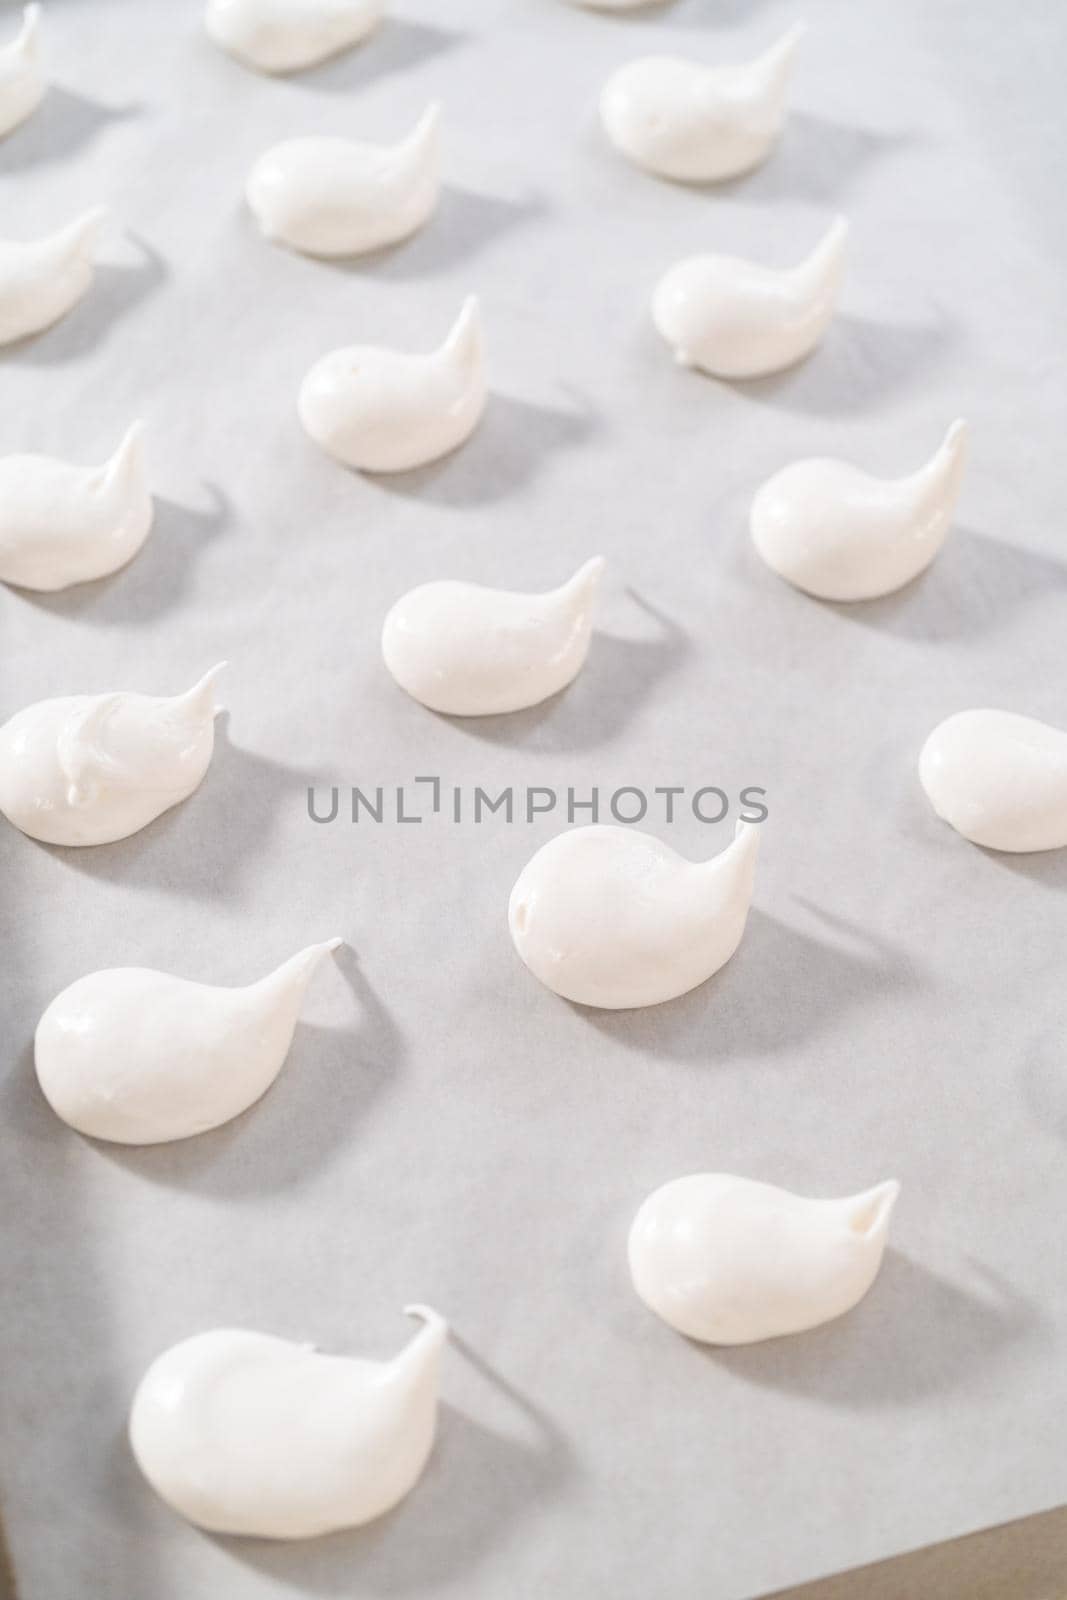 Piping meringue with piping bags into the baking sheet lined with parchment paper to bake Easter meringue cookies.